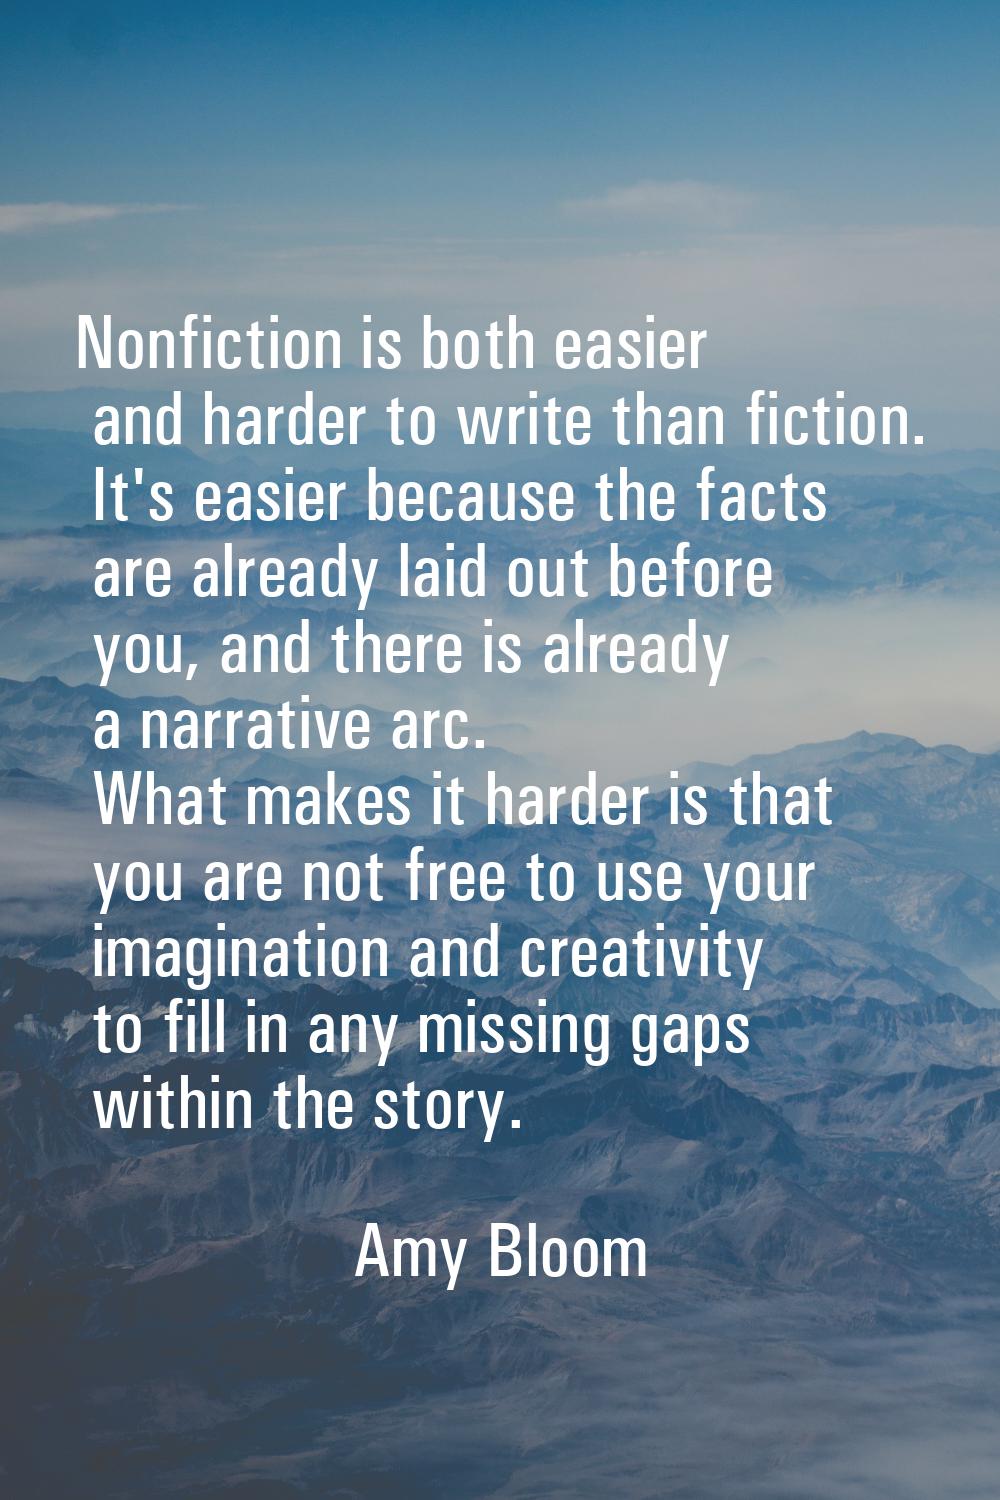 Nonfiction is both easier and harder to write than fiction. It's easier because the facts are alrea